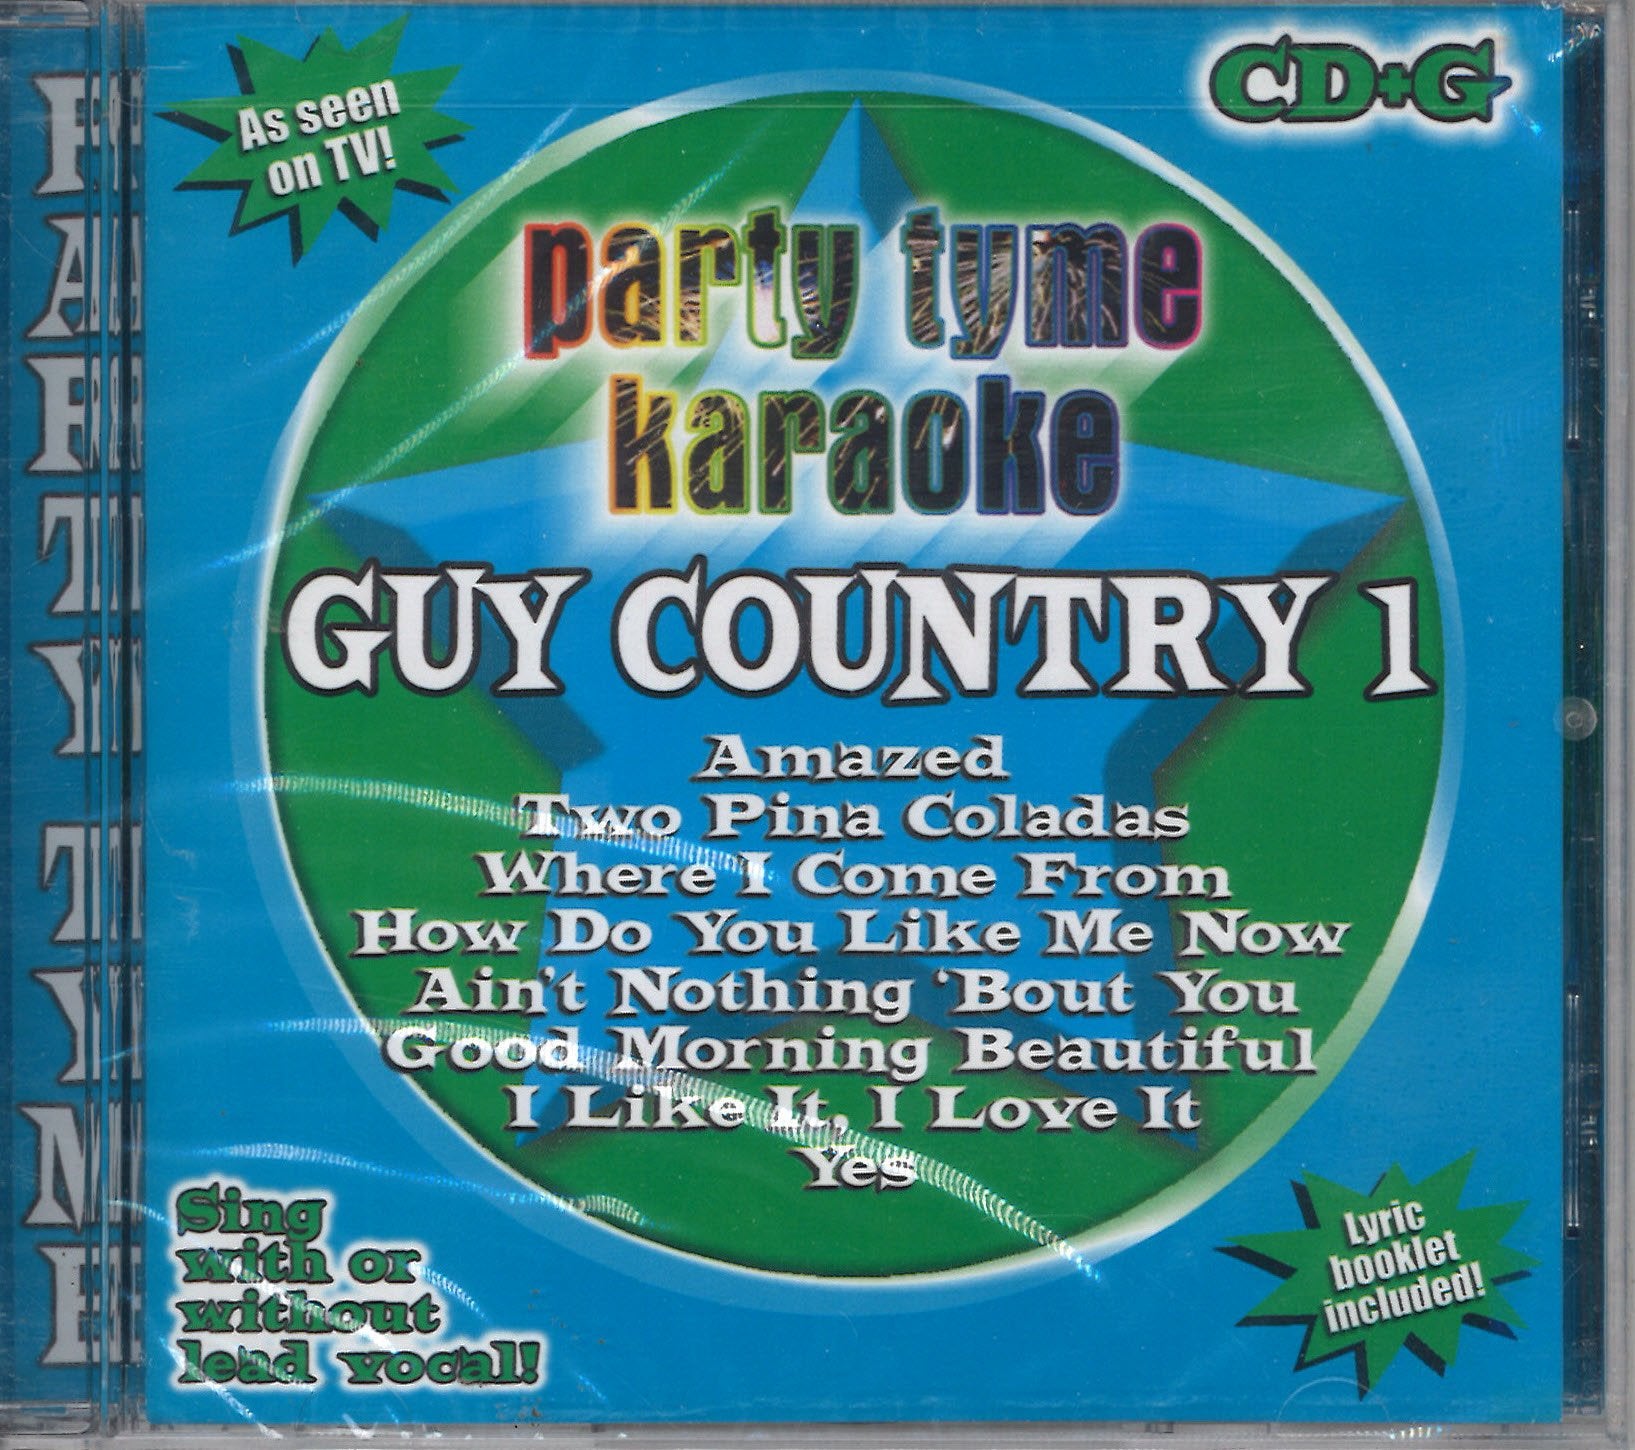 Party Tyme Karaoke Guy Country 1